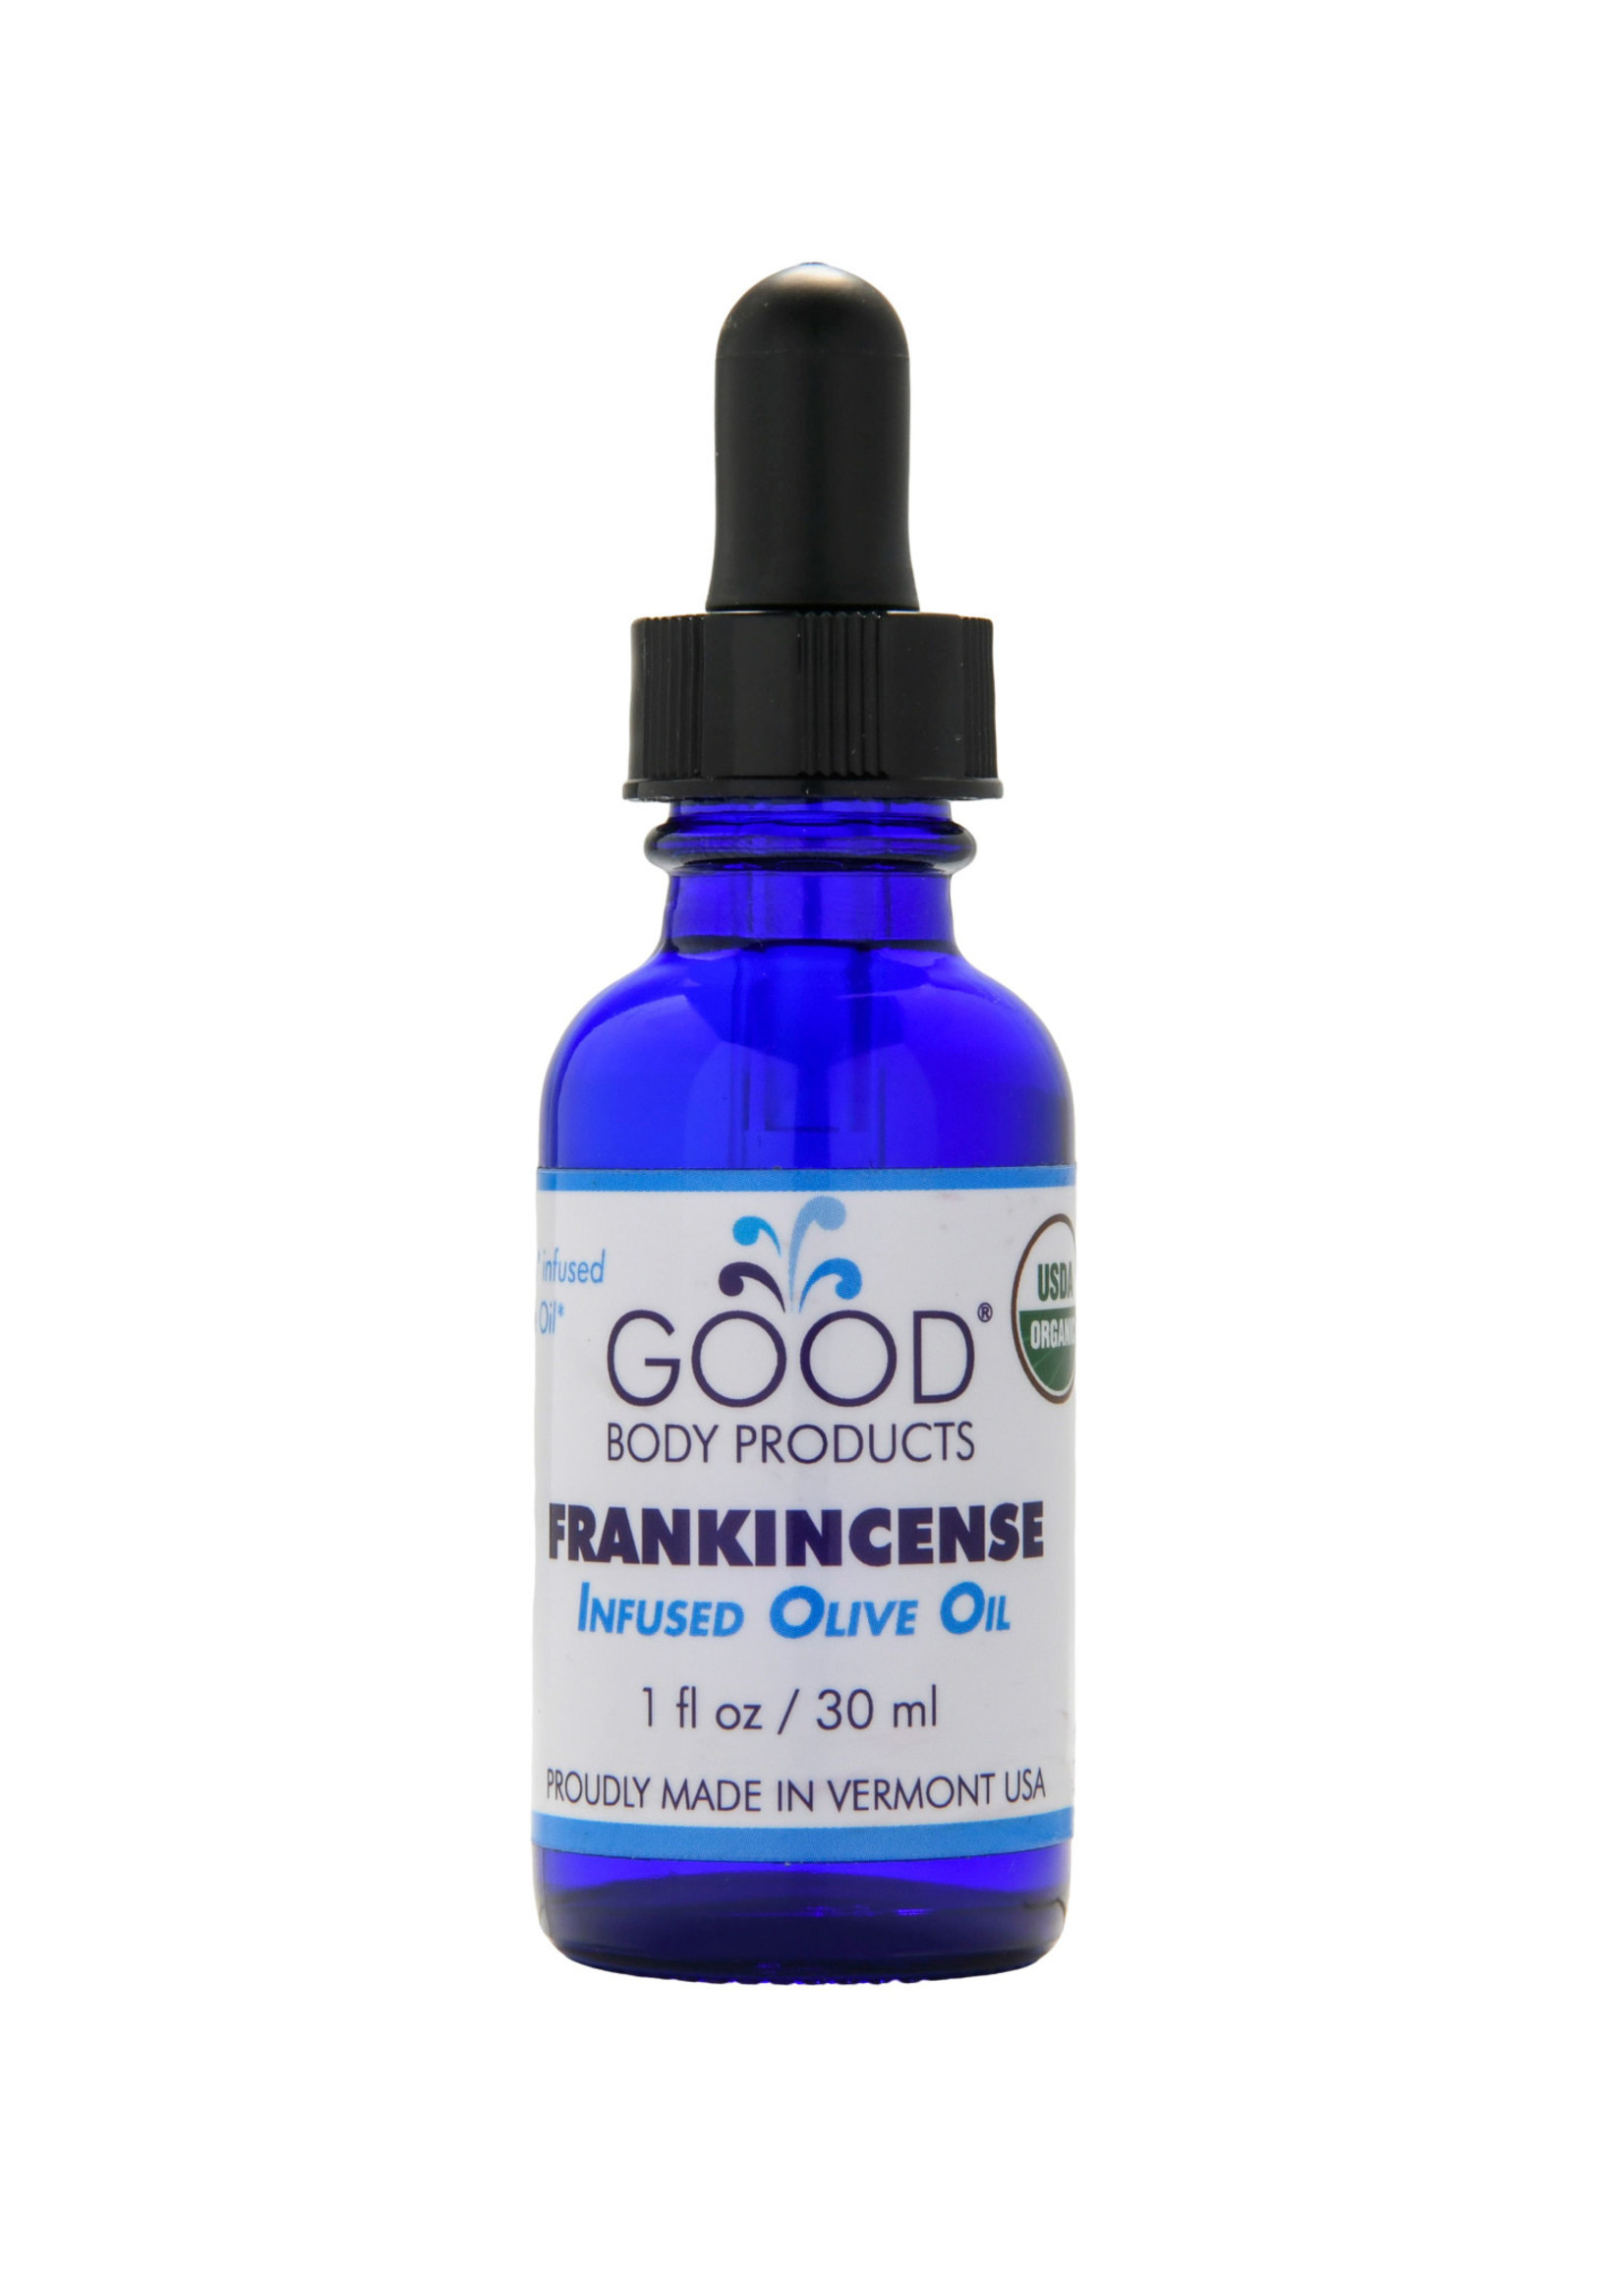 Good Body Products GBP, Frankincense-infused Olive Oil, 1oz